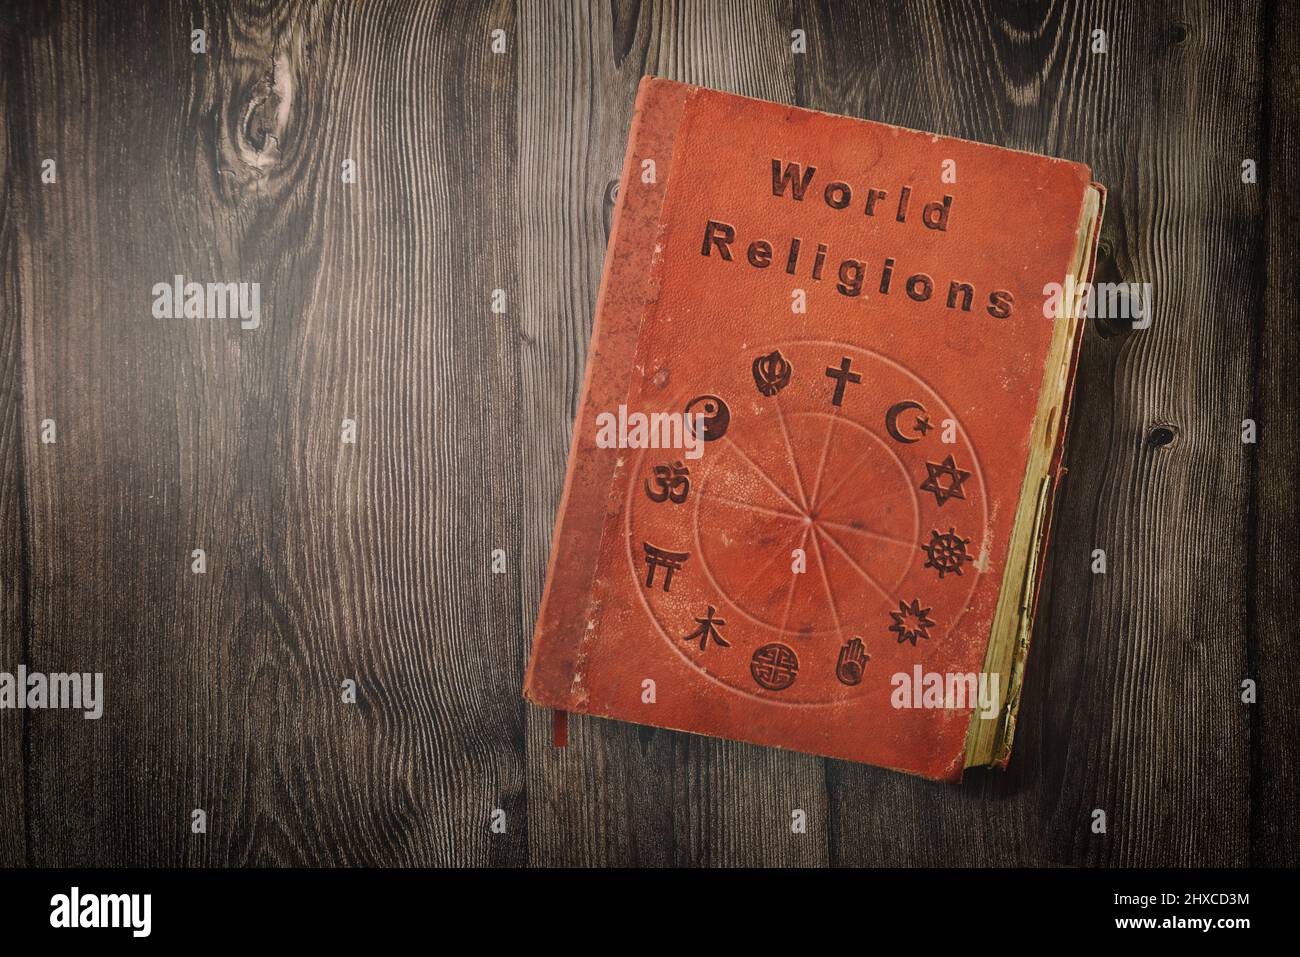 World religions book with religious symbols printed on wooden table. Top view. Stock Photo